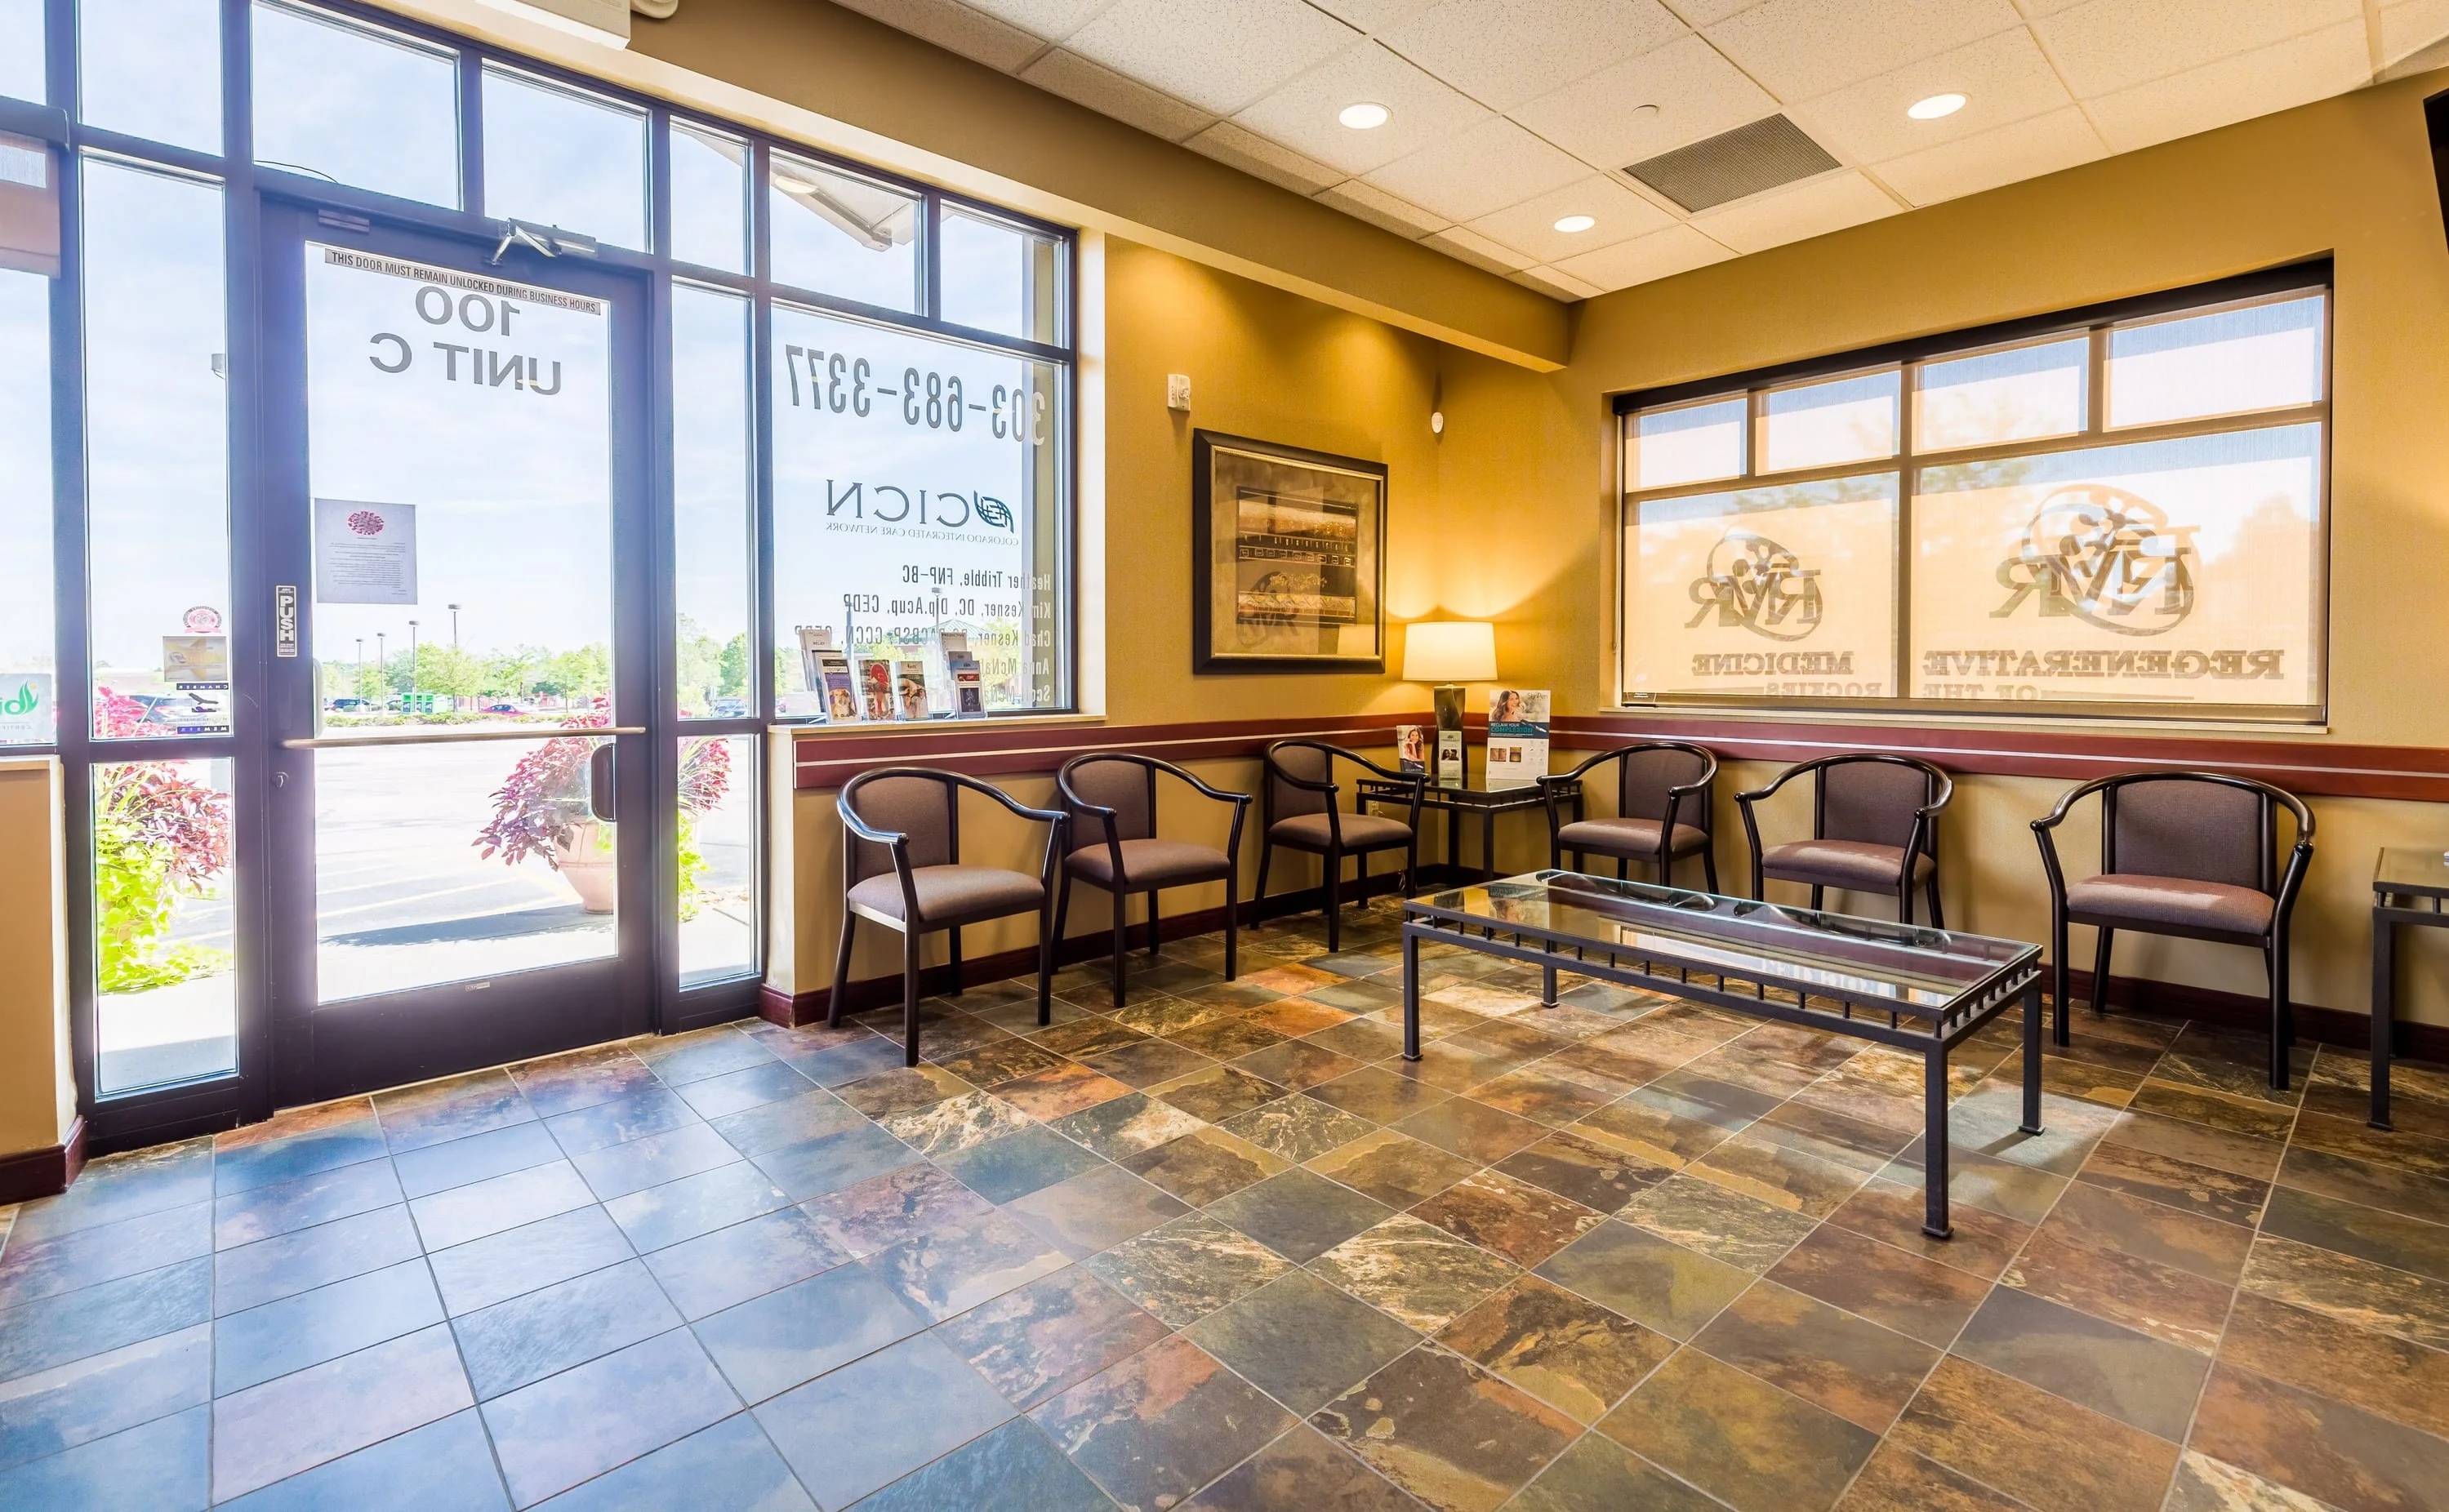 Primary Care and Chiropractic - Chiropractor in Highlands Ranch, CO USA :: Virtual  Office Tour Primary Care and Chiropractic - Chiropractor in Highlands  Ranch, CO USA